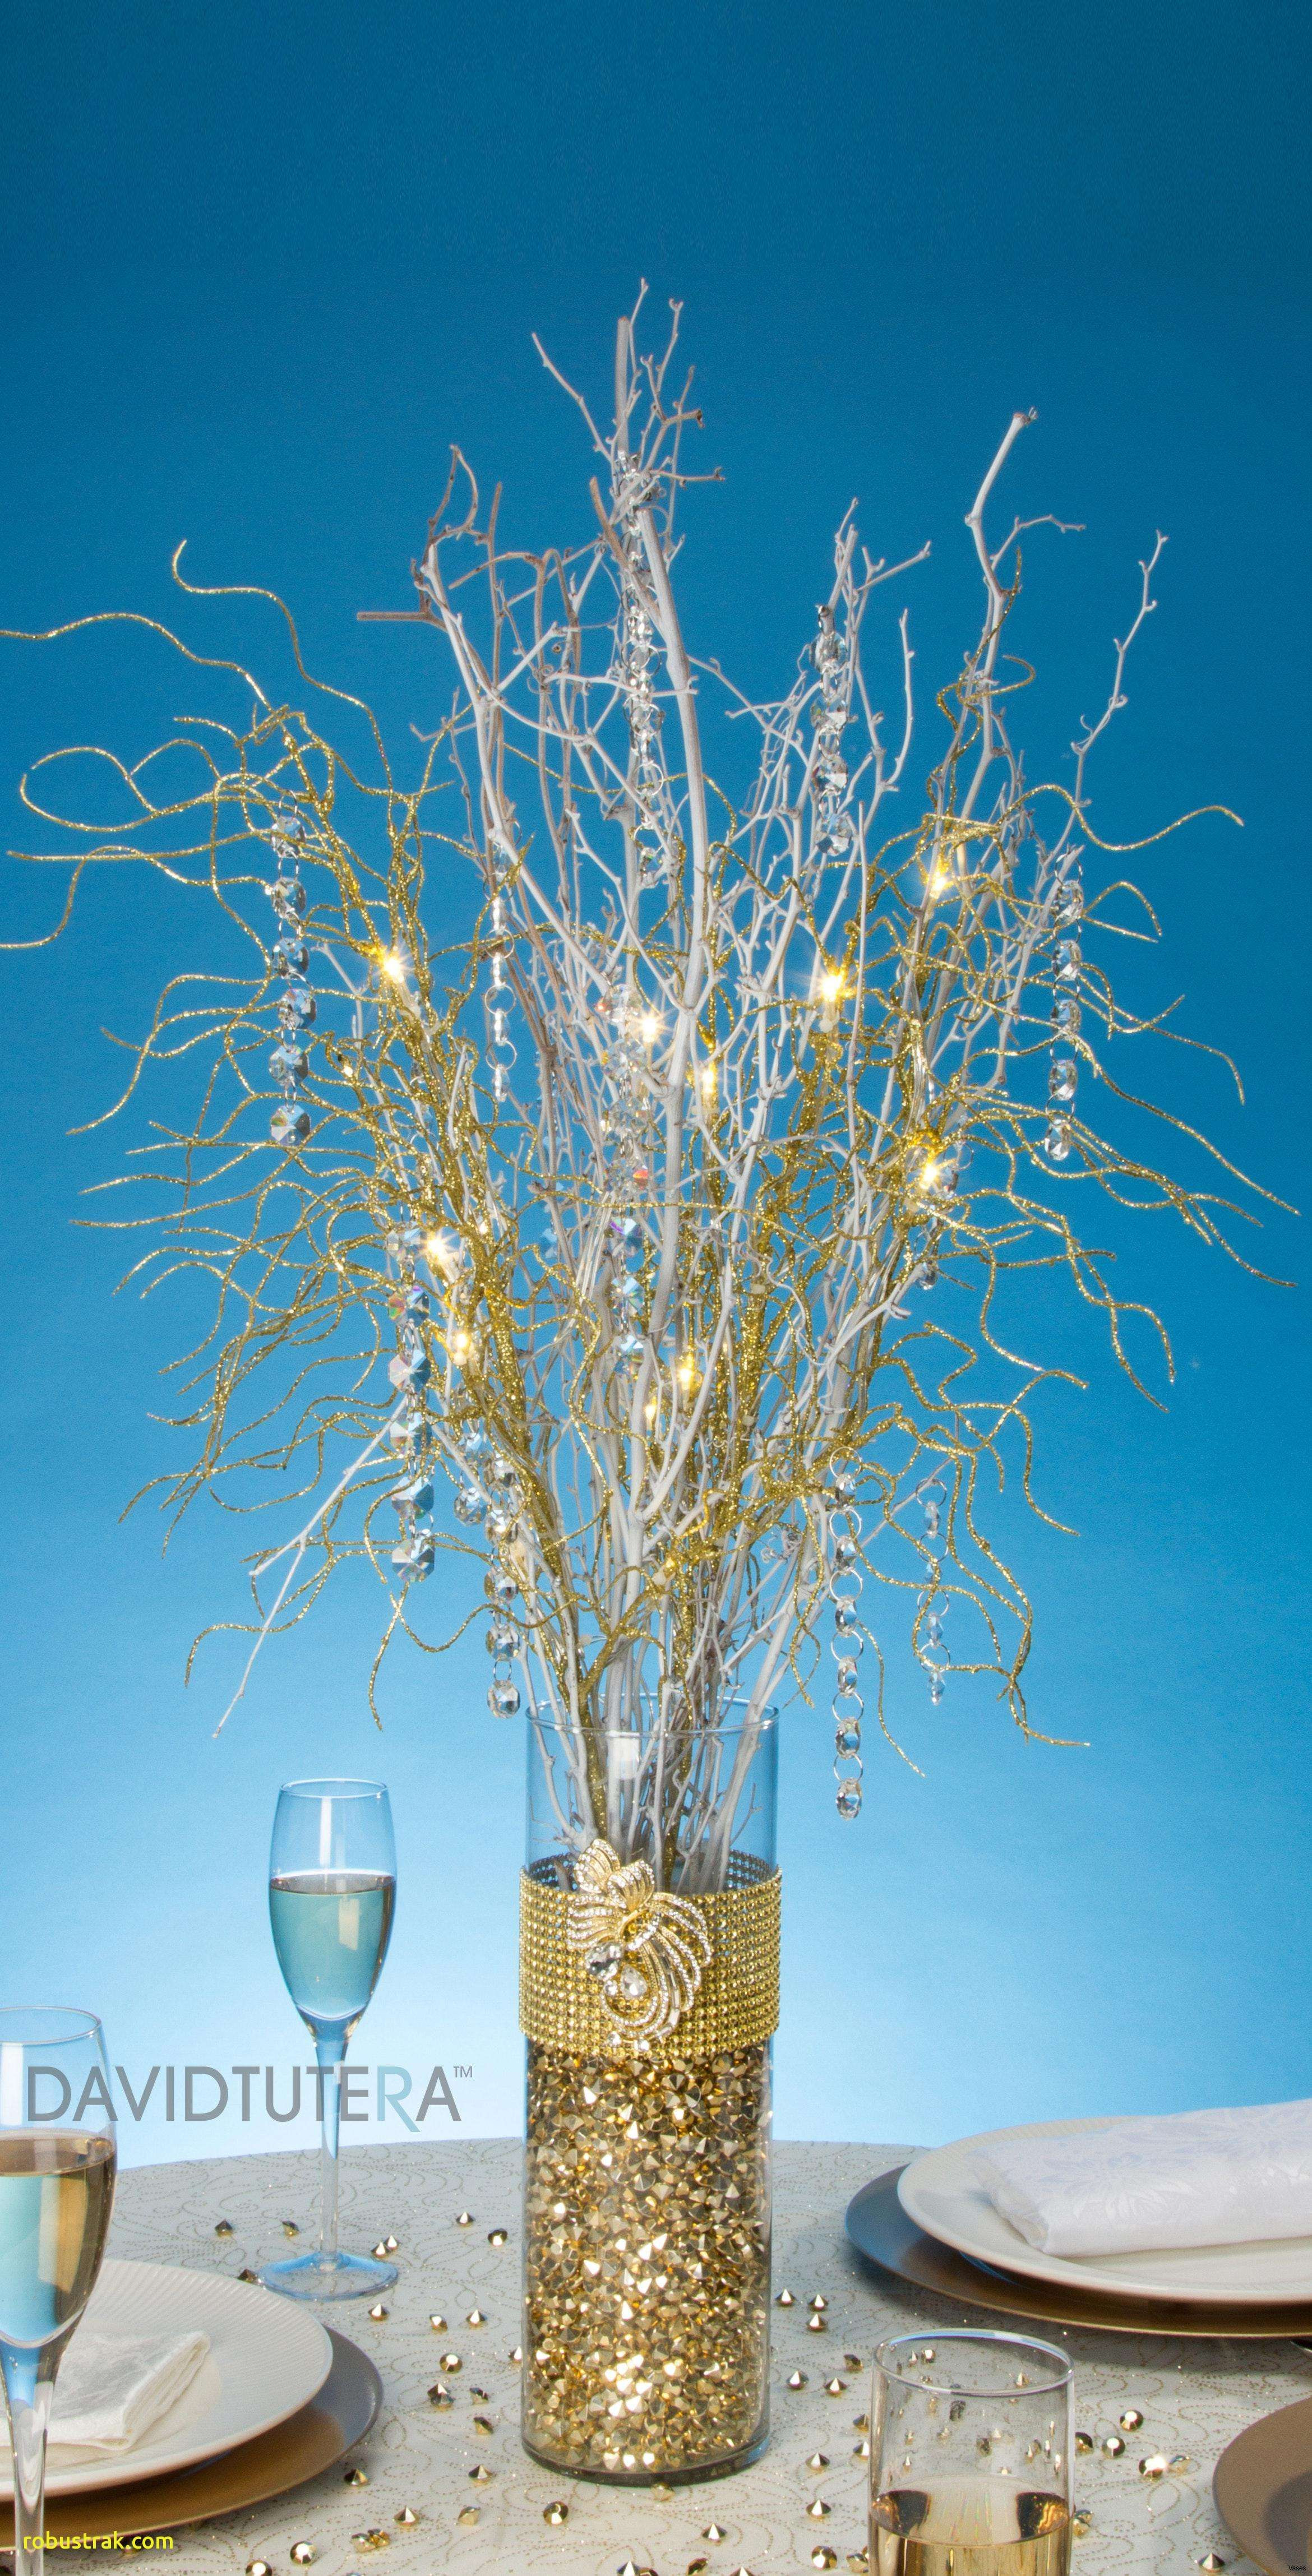 24 Lovely Tall Turquoise Vase 2022 free download tall turquoise vase of tall gold floor vase inspirational new branches in vase as with regard to tall gold floor vase inspirational new branches in vase as decoration